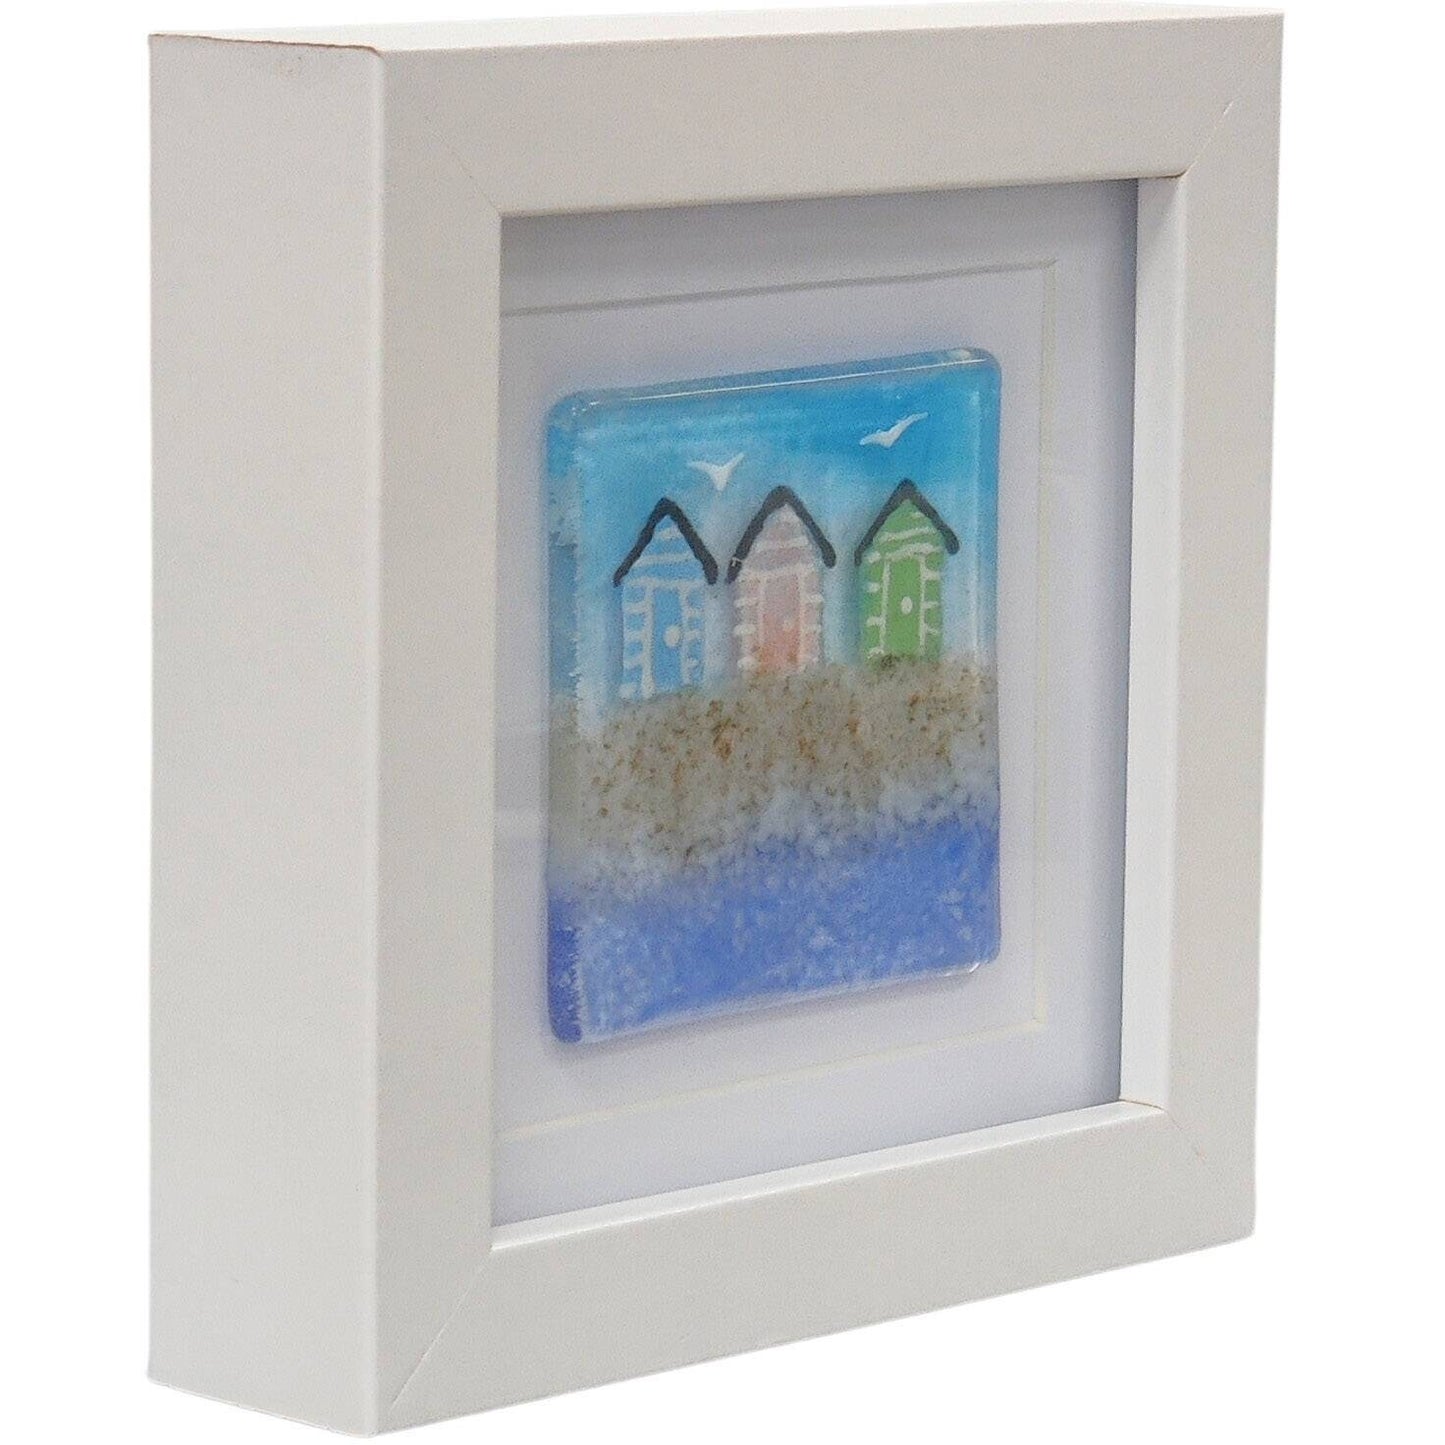 Fused glass small framed picture, mini fused glass gift, beach hut picture, fused glass seaside picture